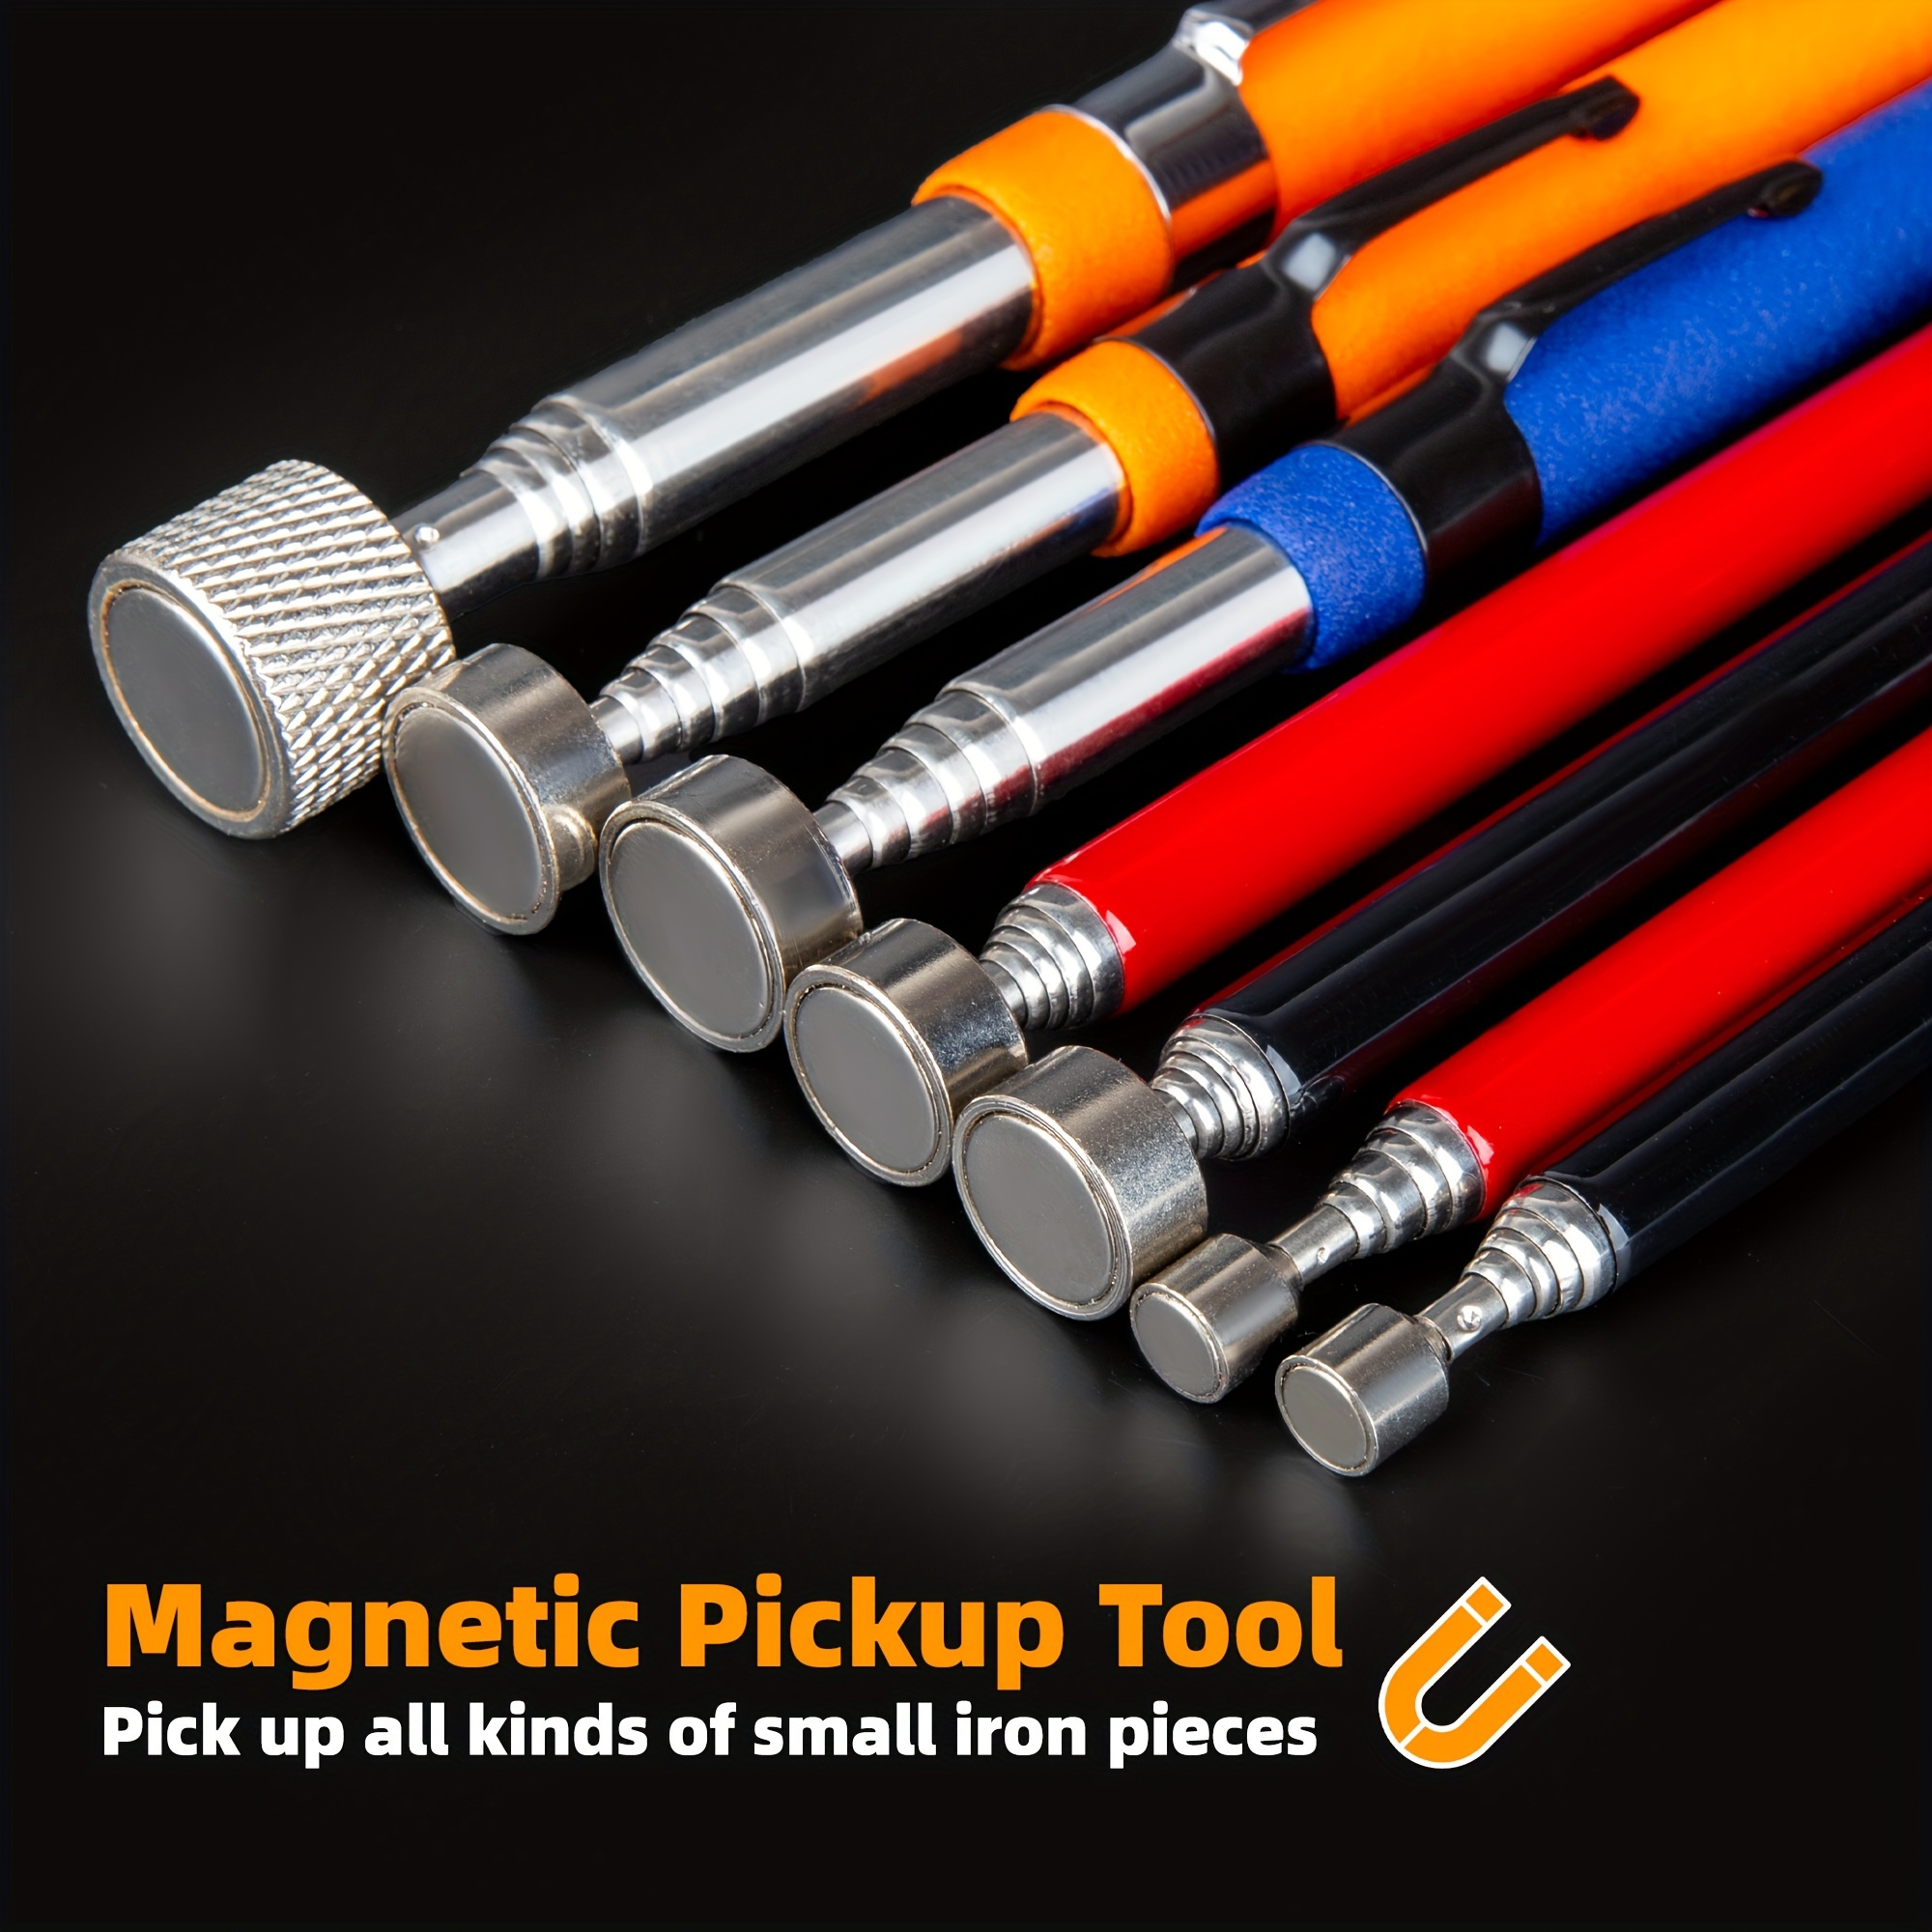 

1pc Magnet Pickup Tool, Orange Telescopic Adjustable Magnetic Pick-up Tools Picking Up Small Pieces